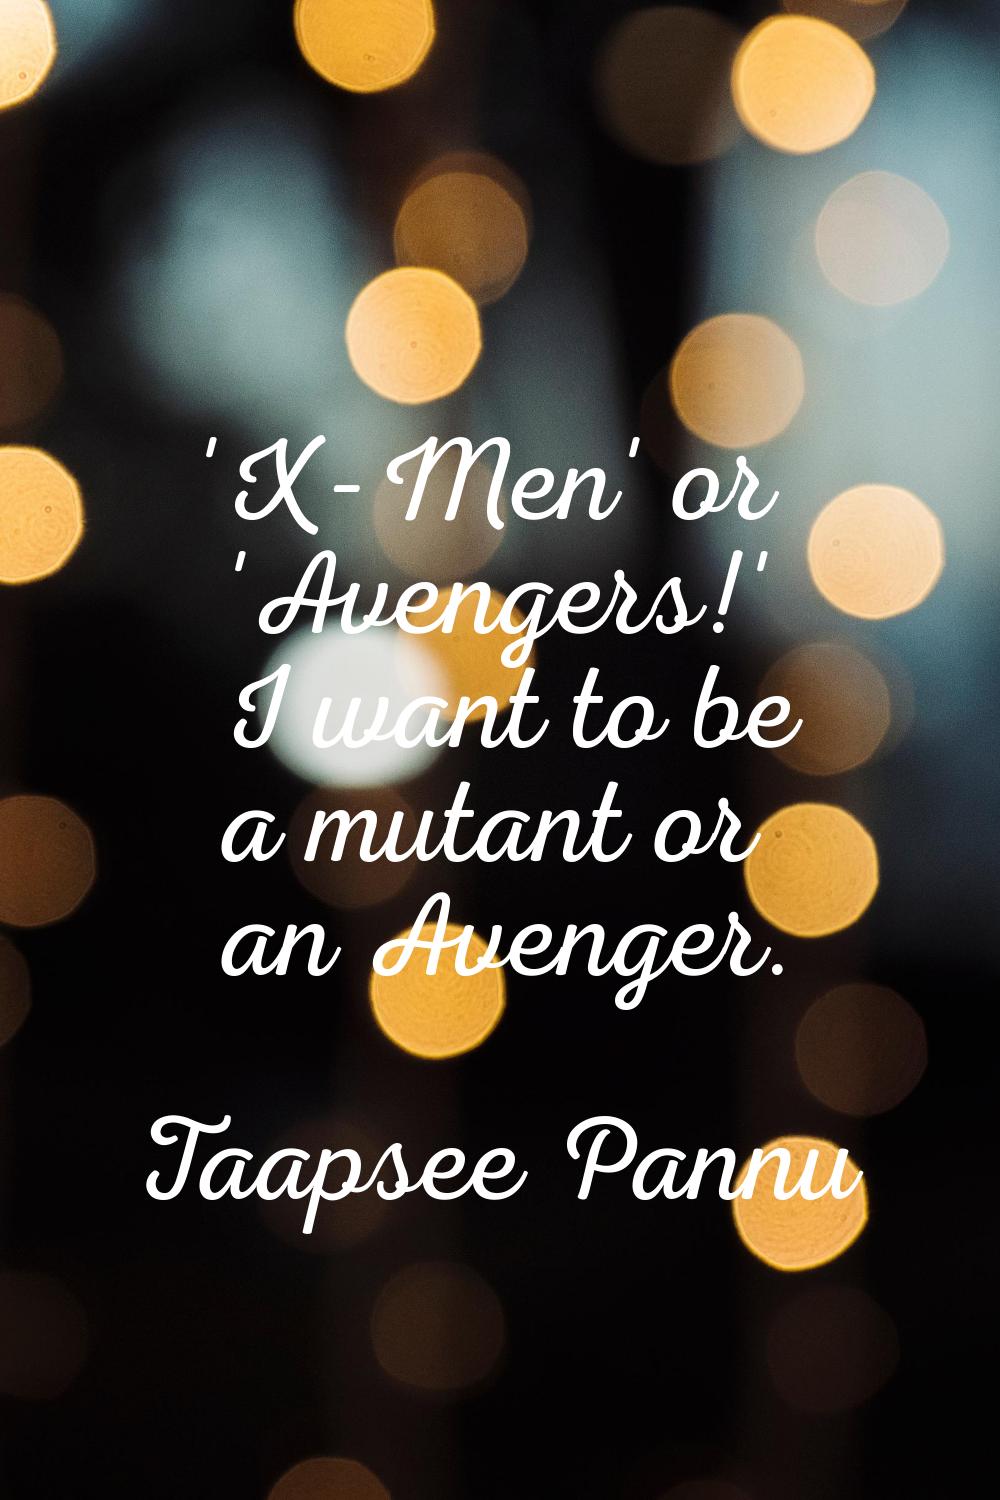 'X-Men' or 'Avengers!' I want to be a mutant or an Avenger.